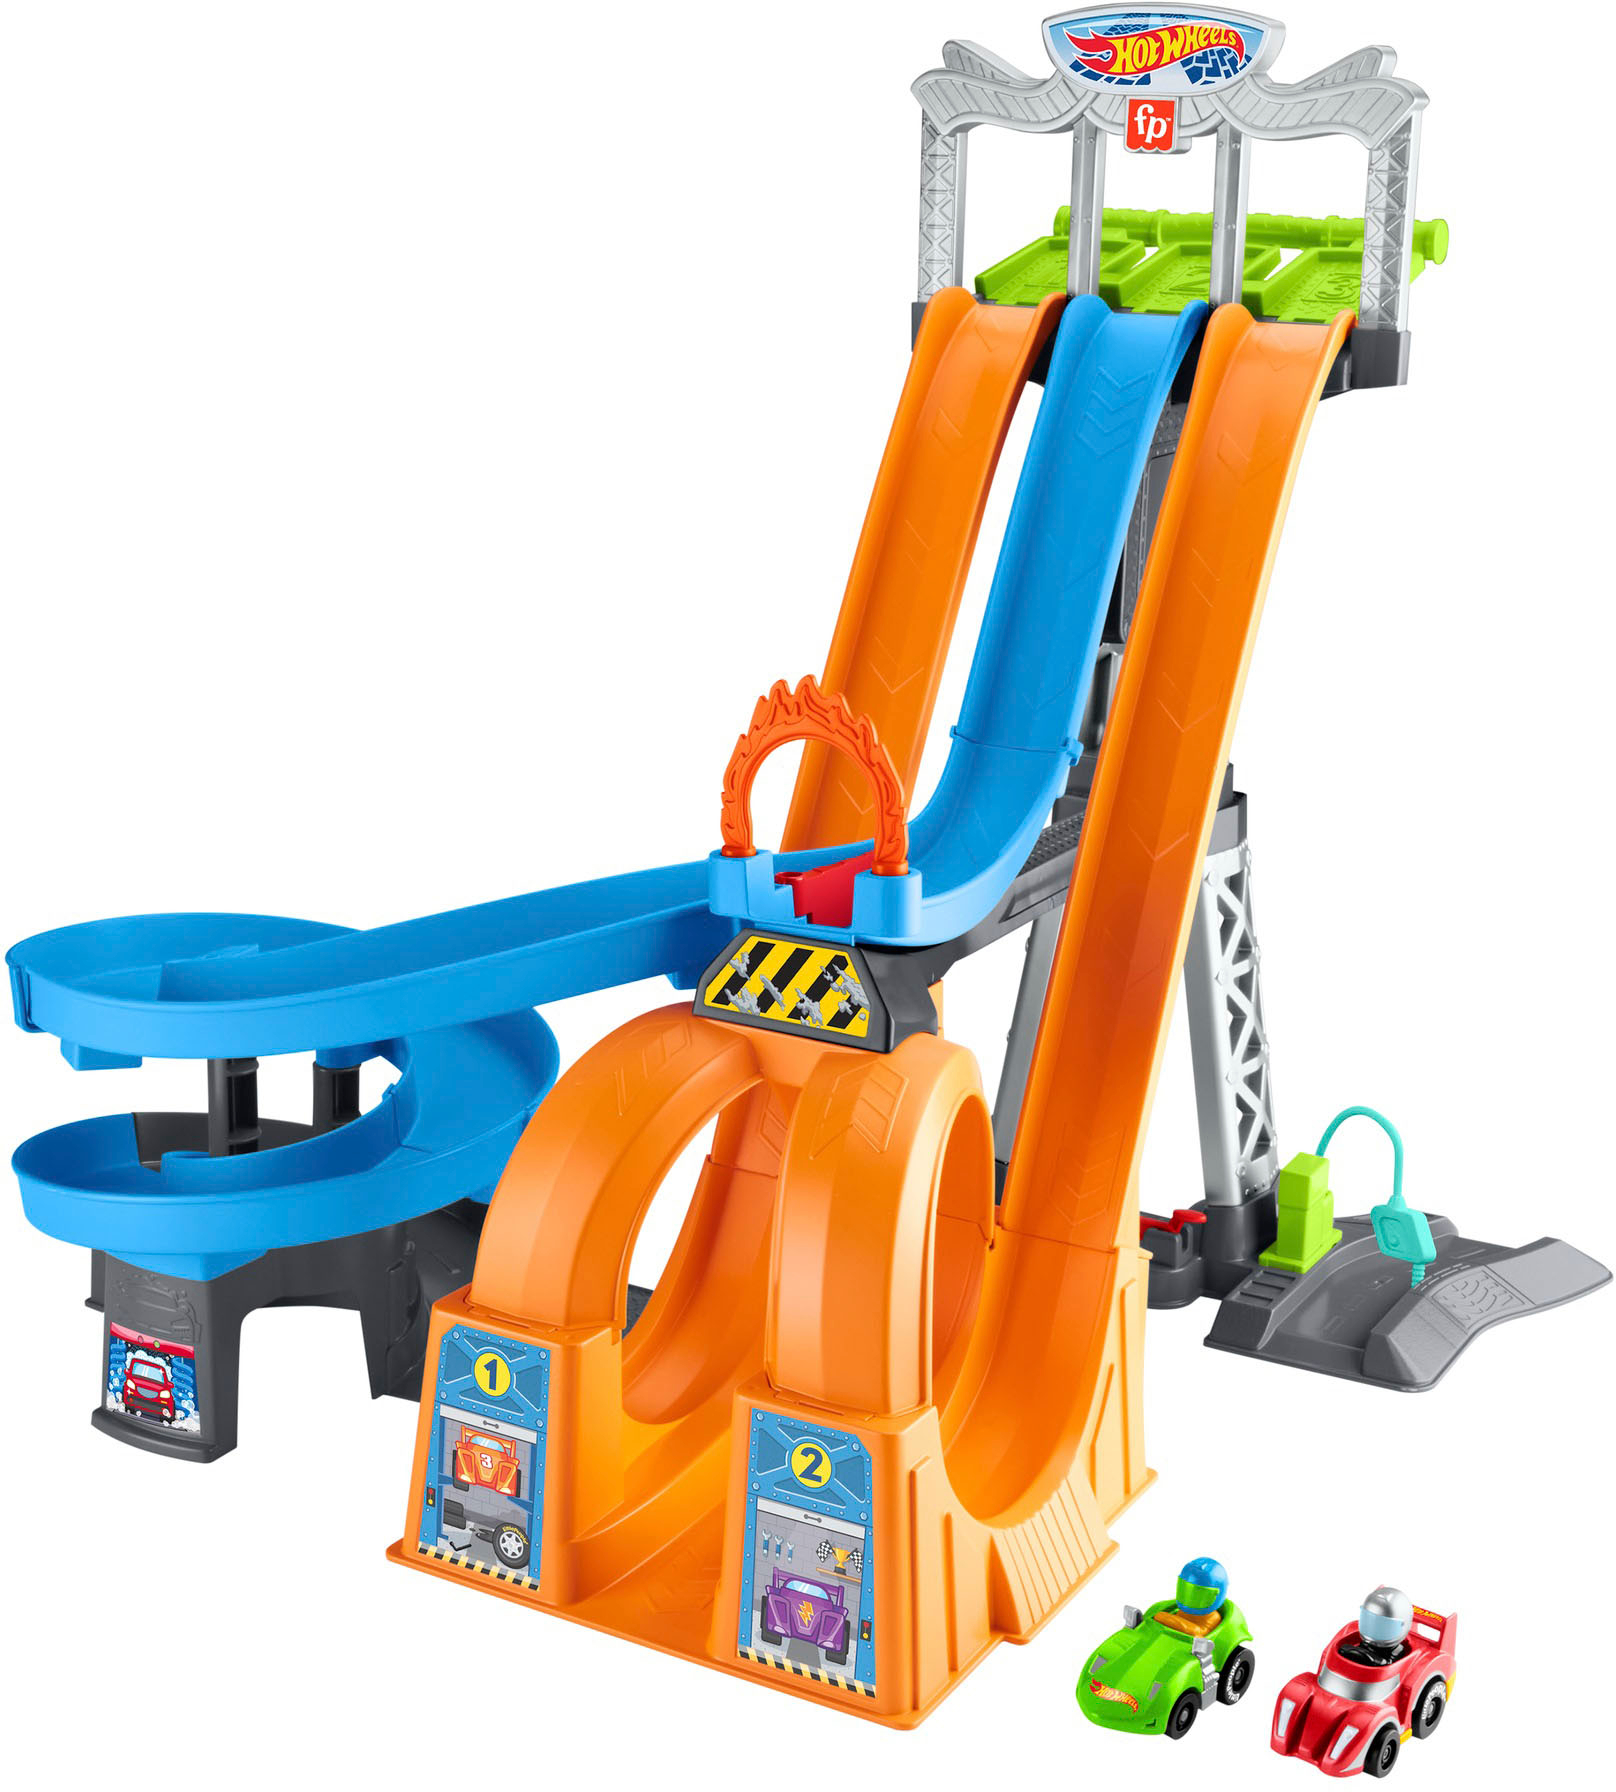 Angle View: Hot Wheels - Racing Loops Tower by Little People - Blue/Orange